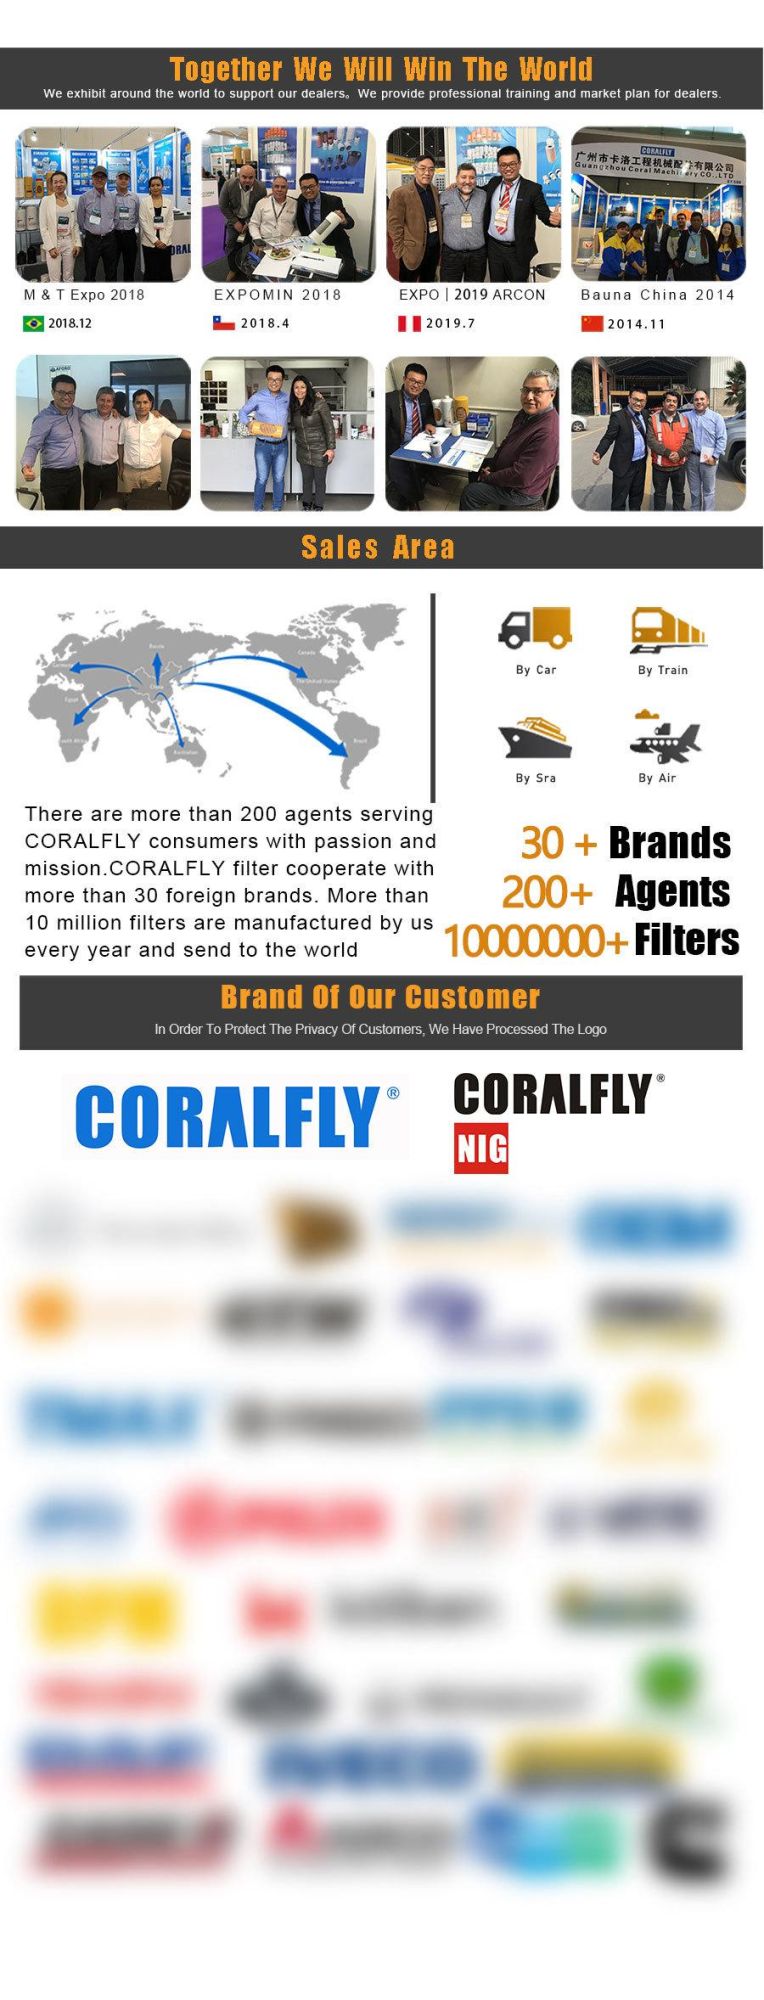 Coralfly Hh160-32093 Hh660-36060 Hh330-82630 Hhta0-59900 1627132090 Hh1g032430 1521332430 1521332090 1505632432 for Kubota Lube Filter Spin-on Oil Filter